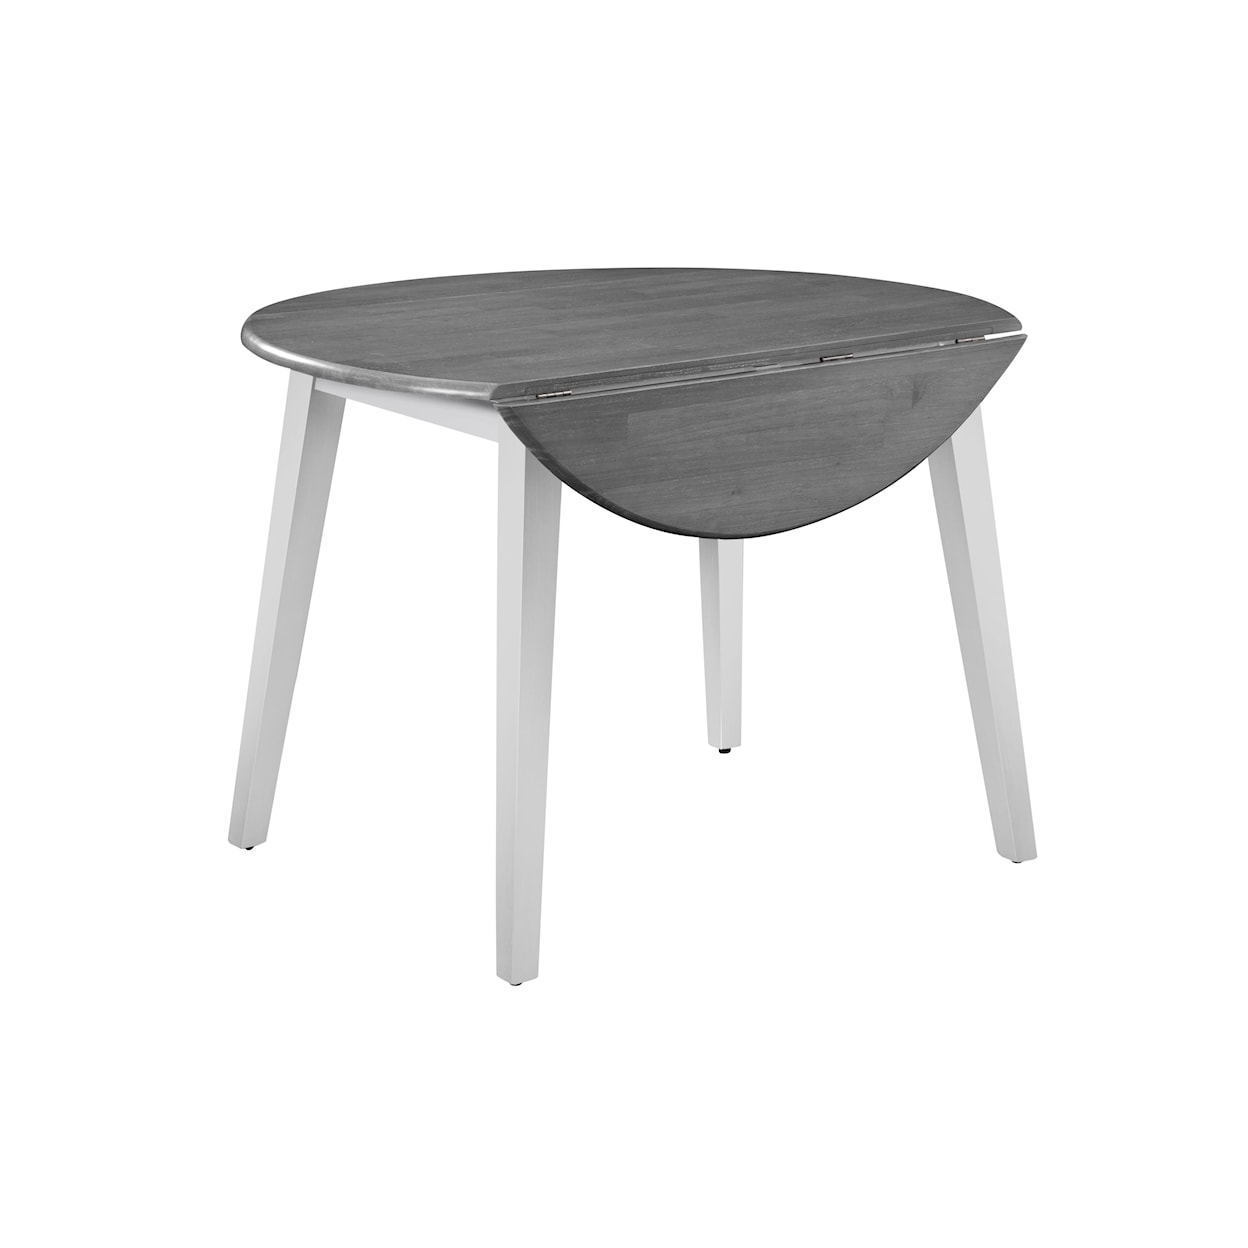 John Thomas Dining Essentials 42" RoundTable in Heather Gray & White